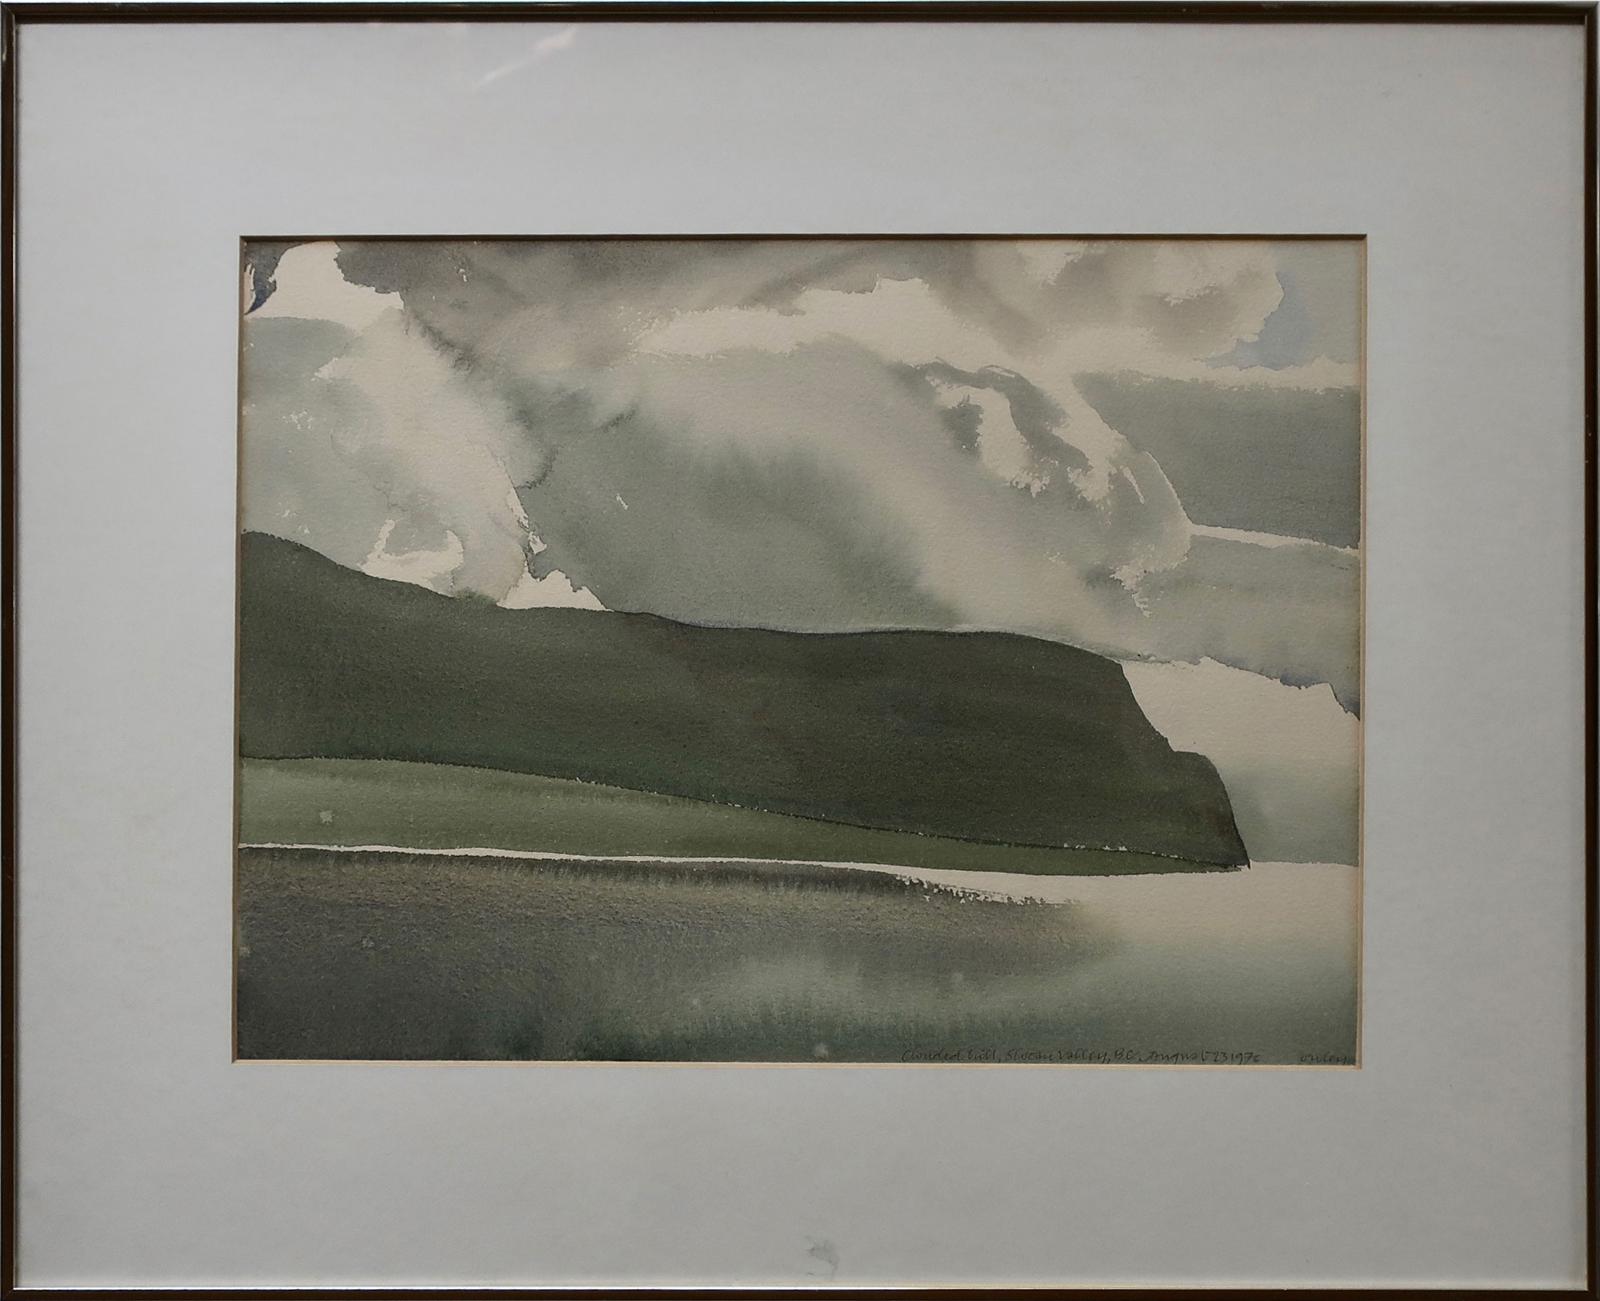 Norman Anthony (Toni) Onley (1928-2004) - Cloudy Hill, Slocan Valley, B.C.